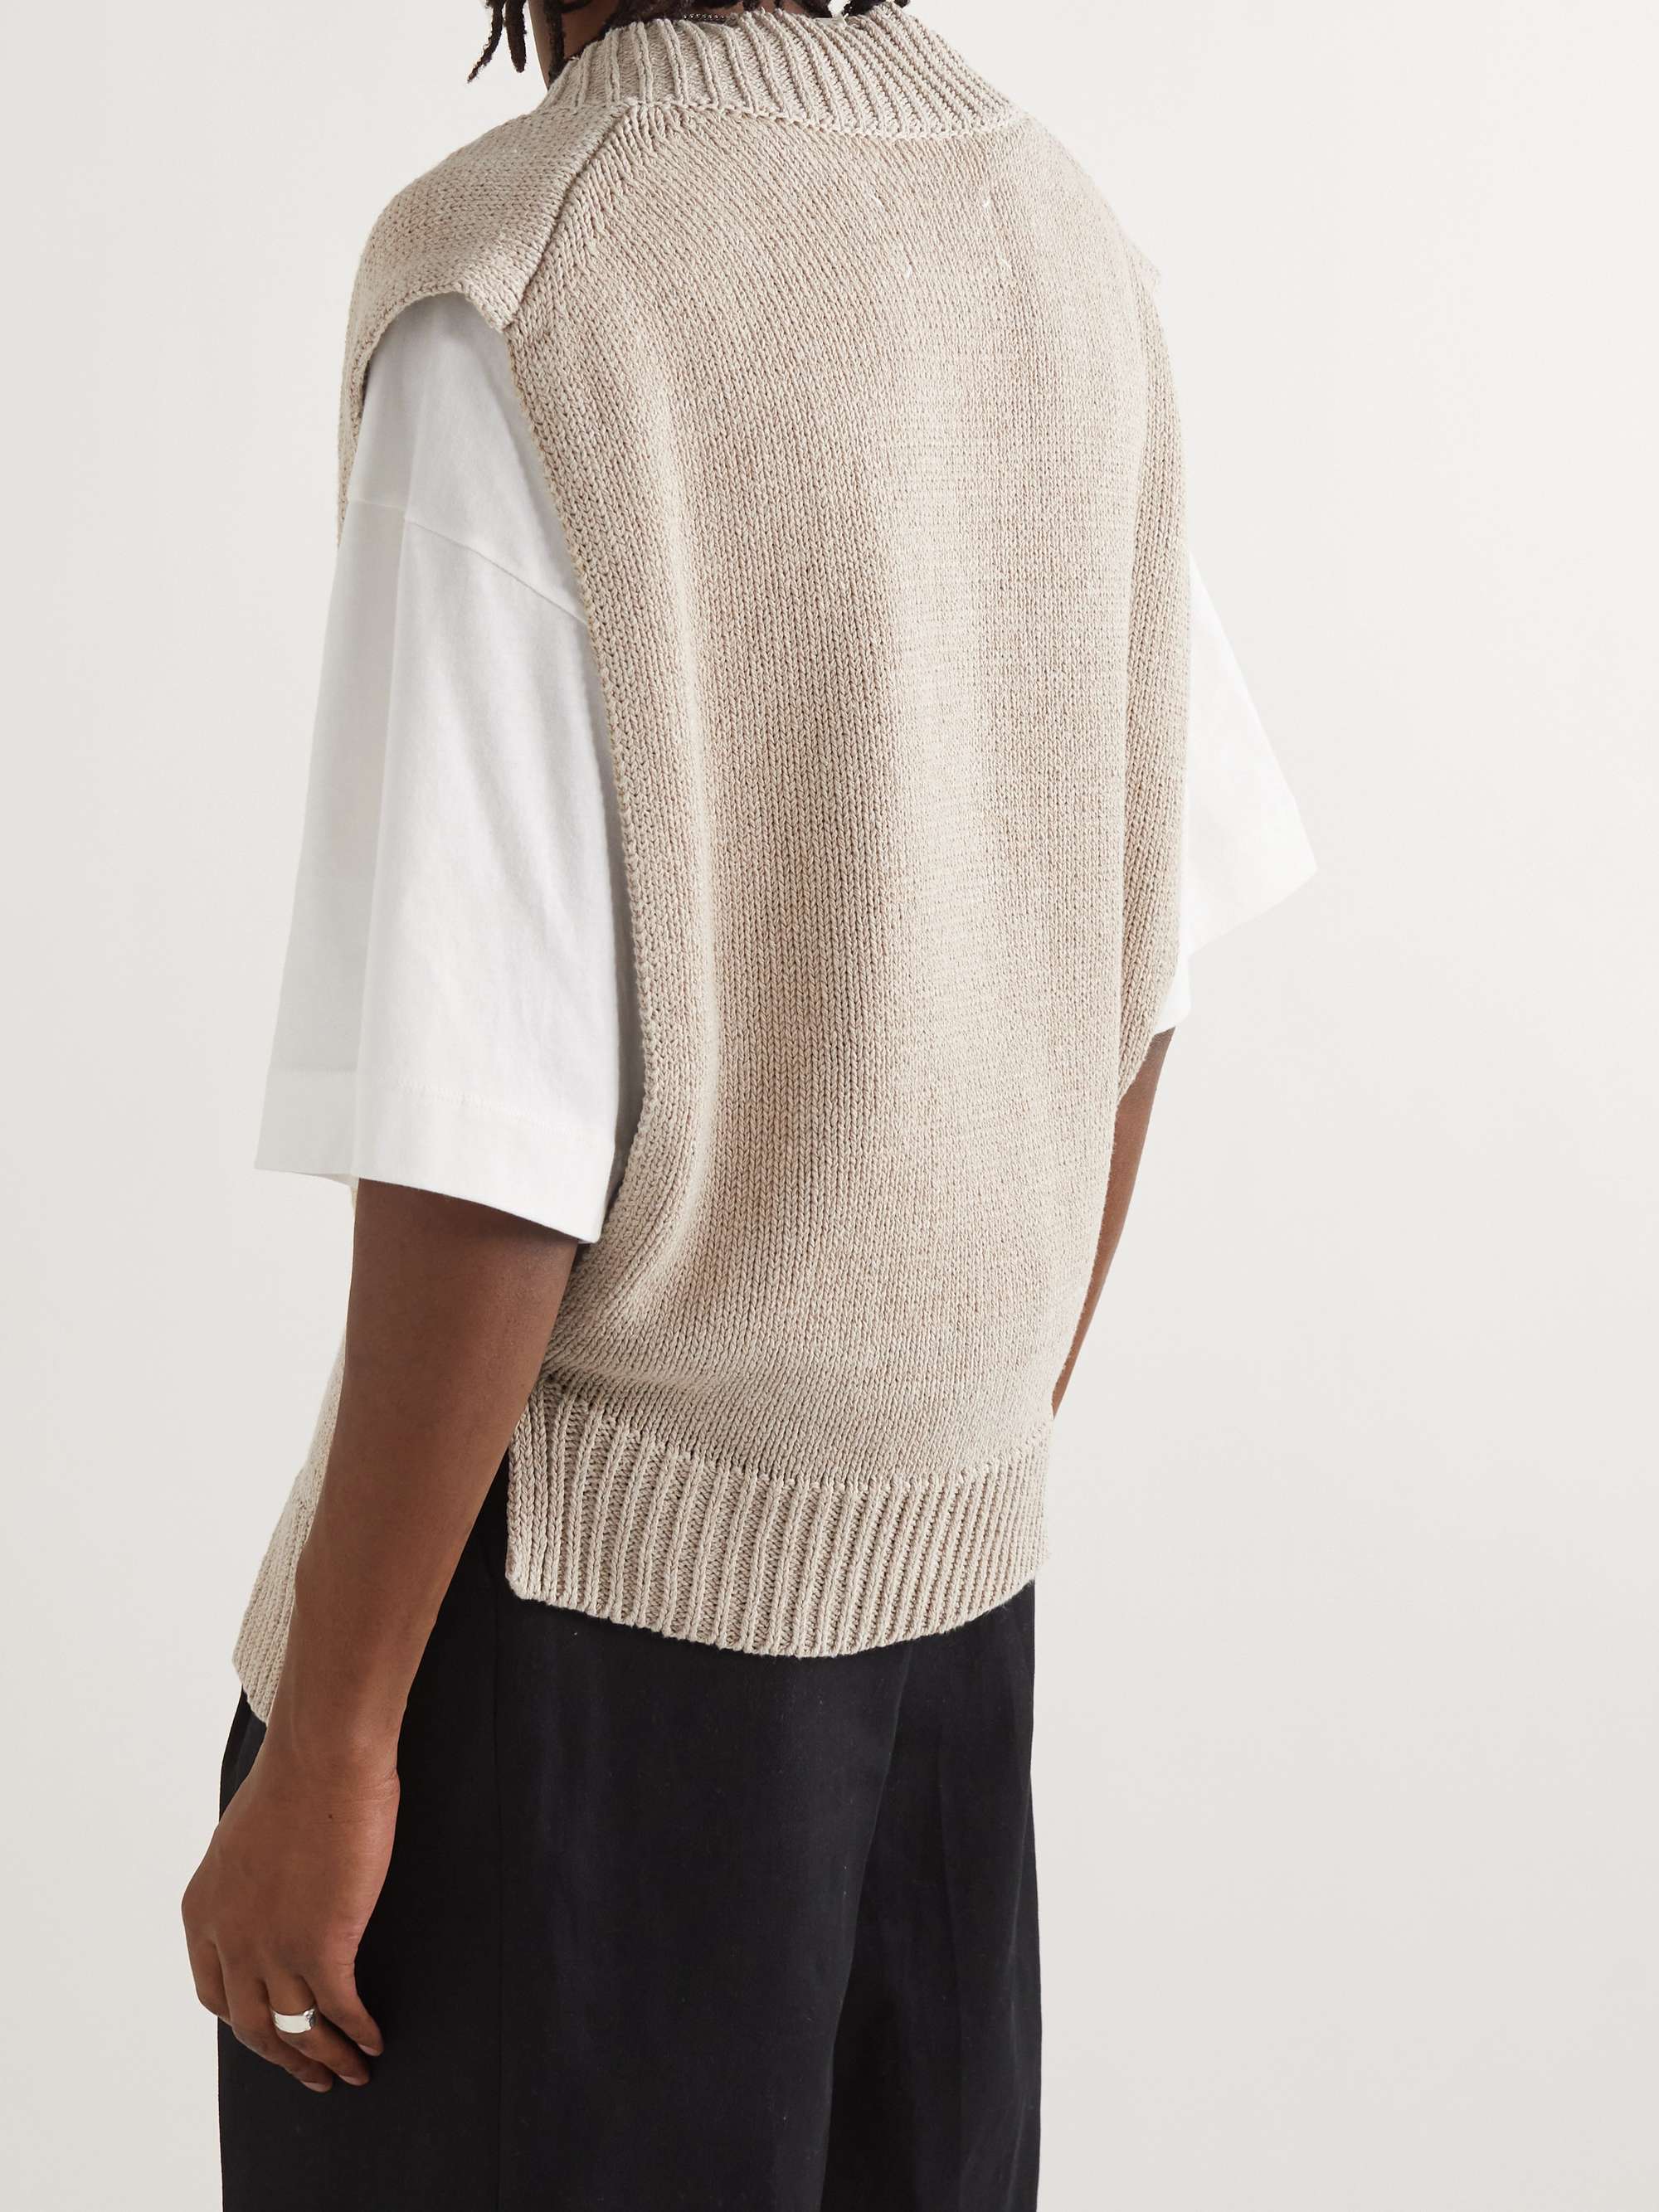 Distressed Knitted Sweater Vest